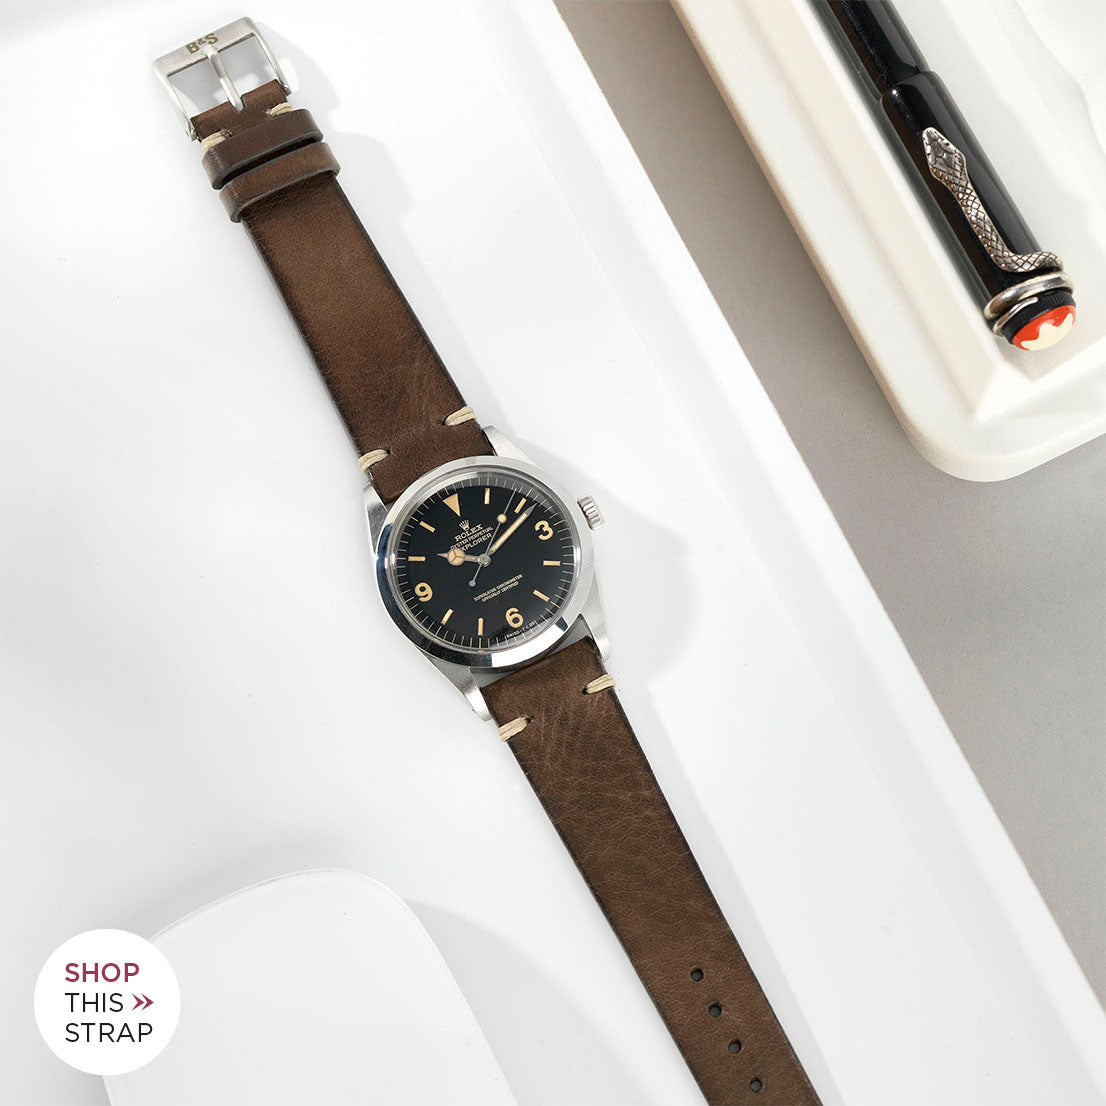 Bulang and Sons_Strap Guide_The Rolex 1016 Explorer_Smokeyjack Grey Leather Watch Strap